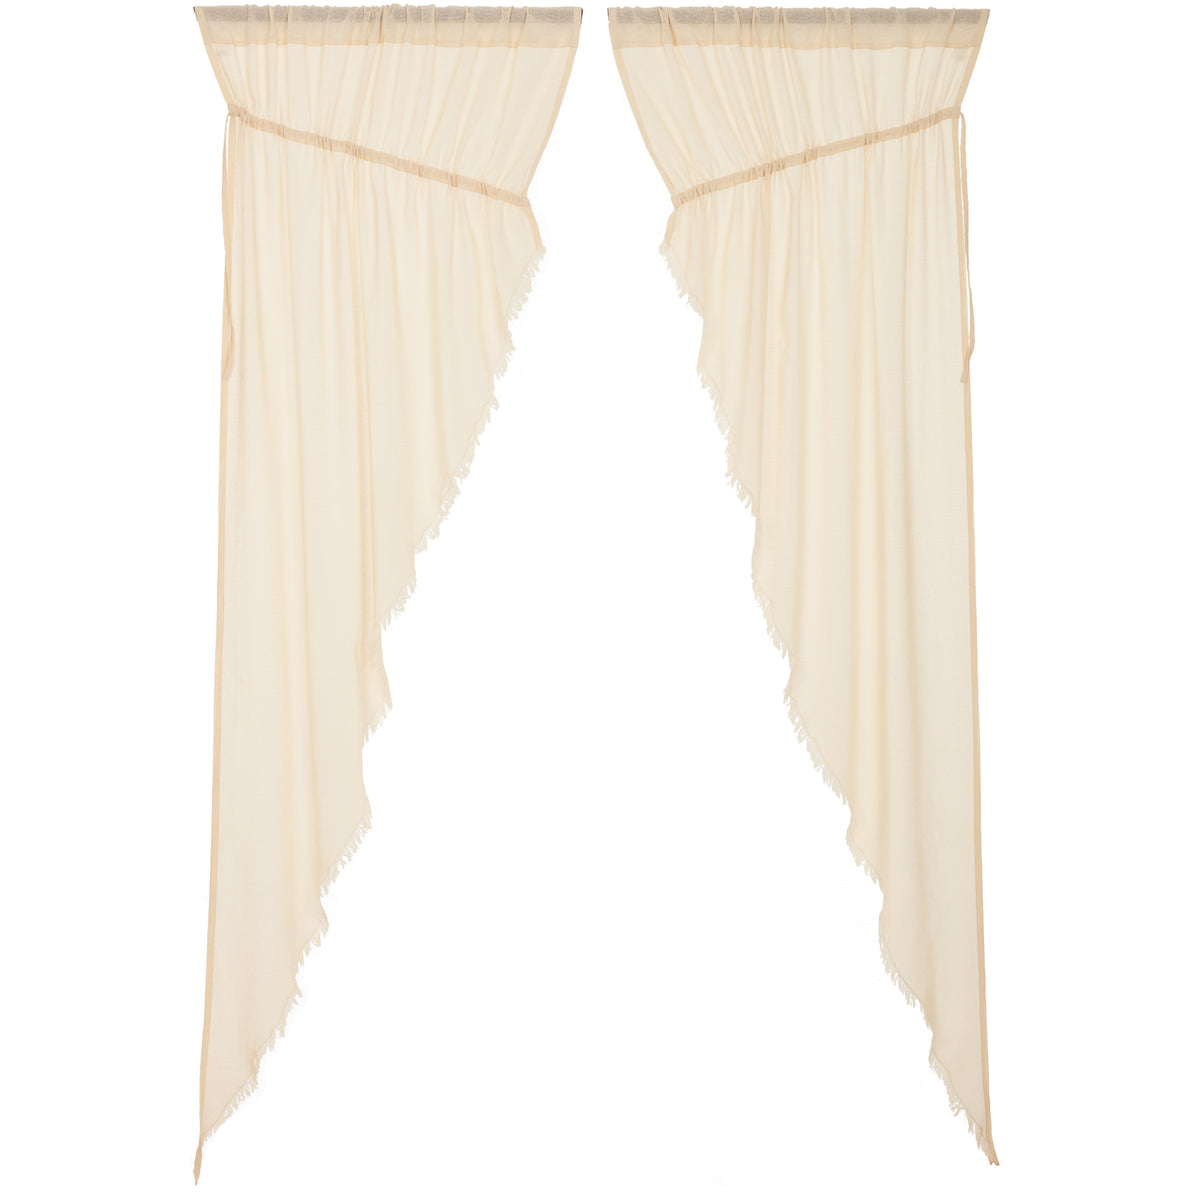 April & Olive Tobacco Cloth Natural Prairie Long Panel Fringed Set of 2 84x36x18 By VHC Brands